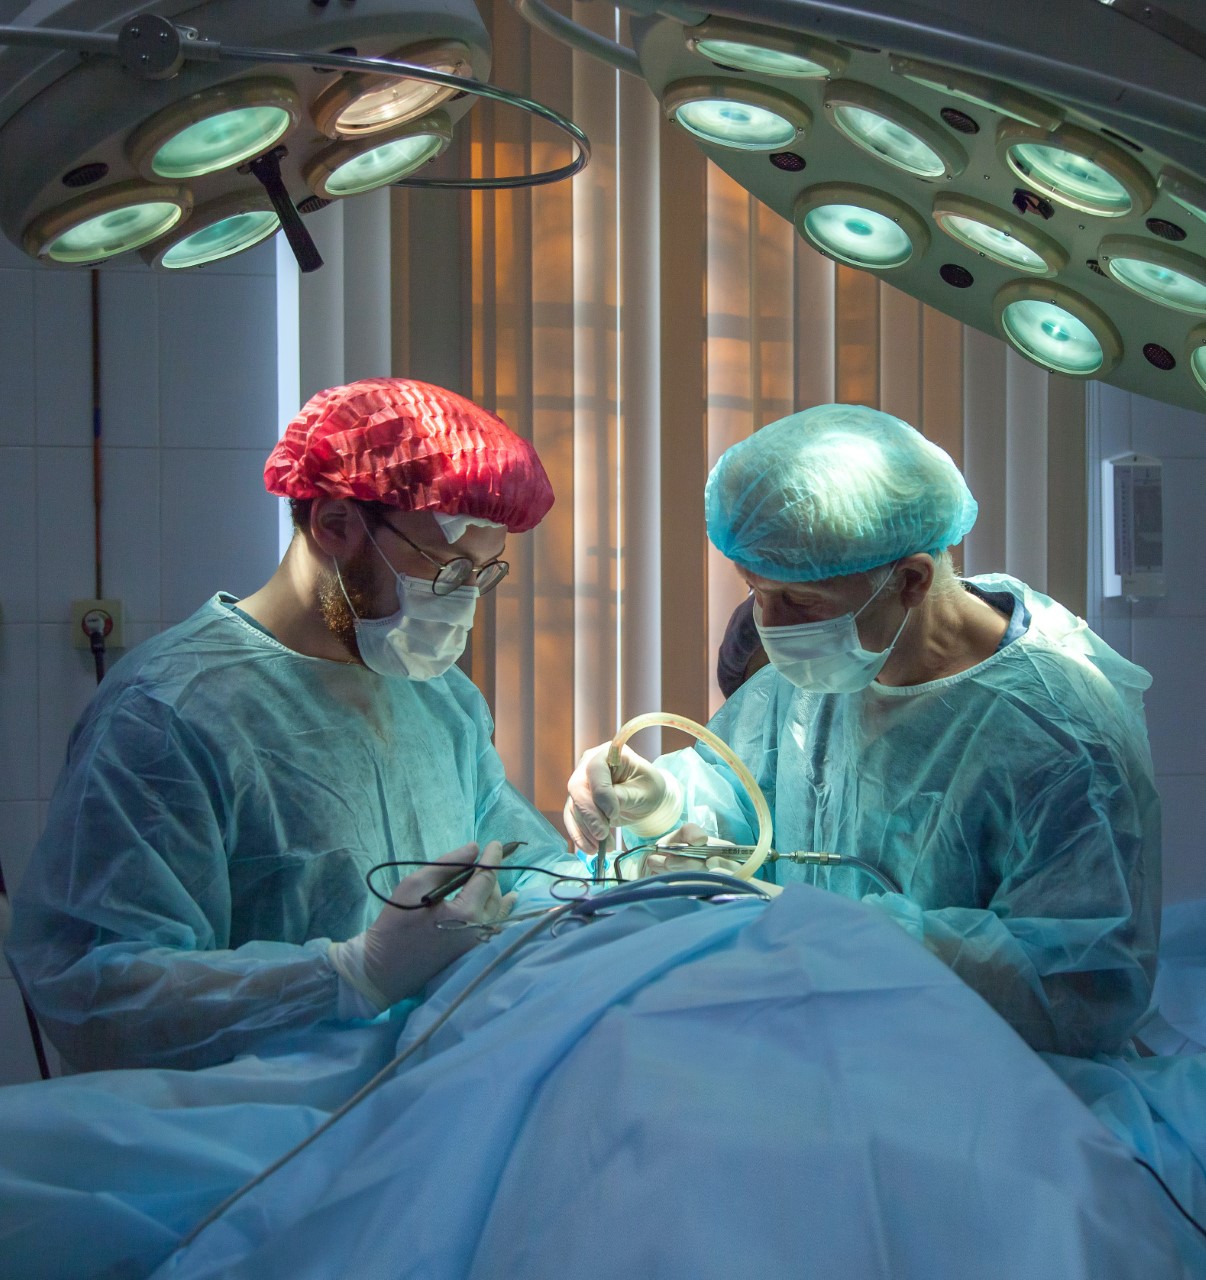 Two surgeons conduct patient surgery on hospital bed